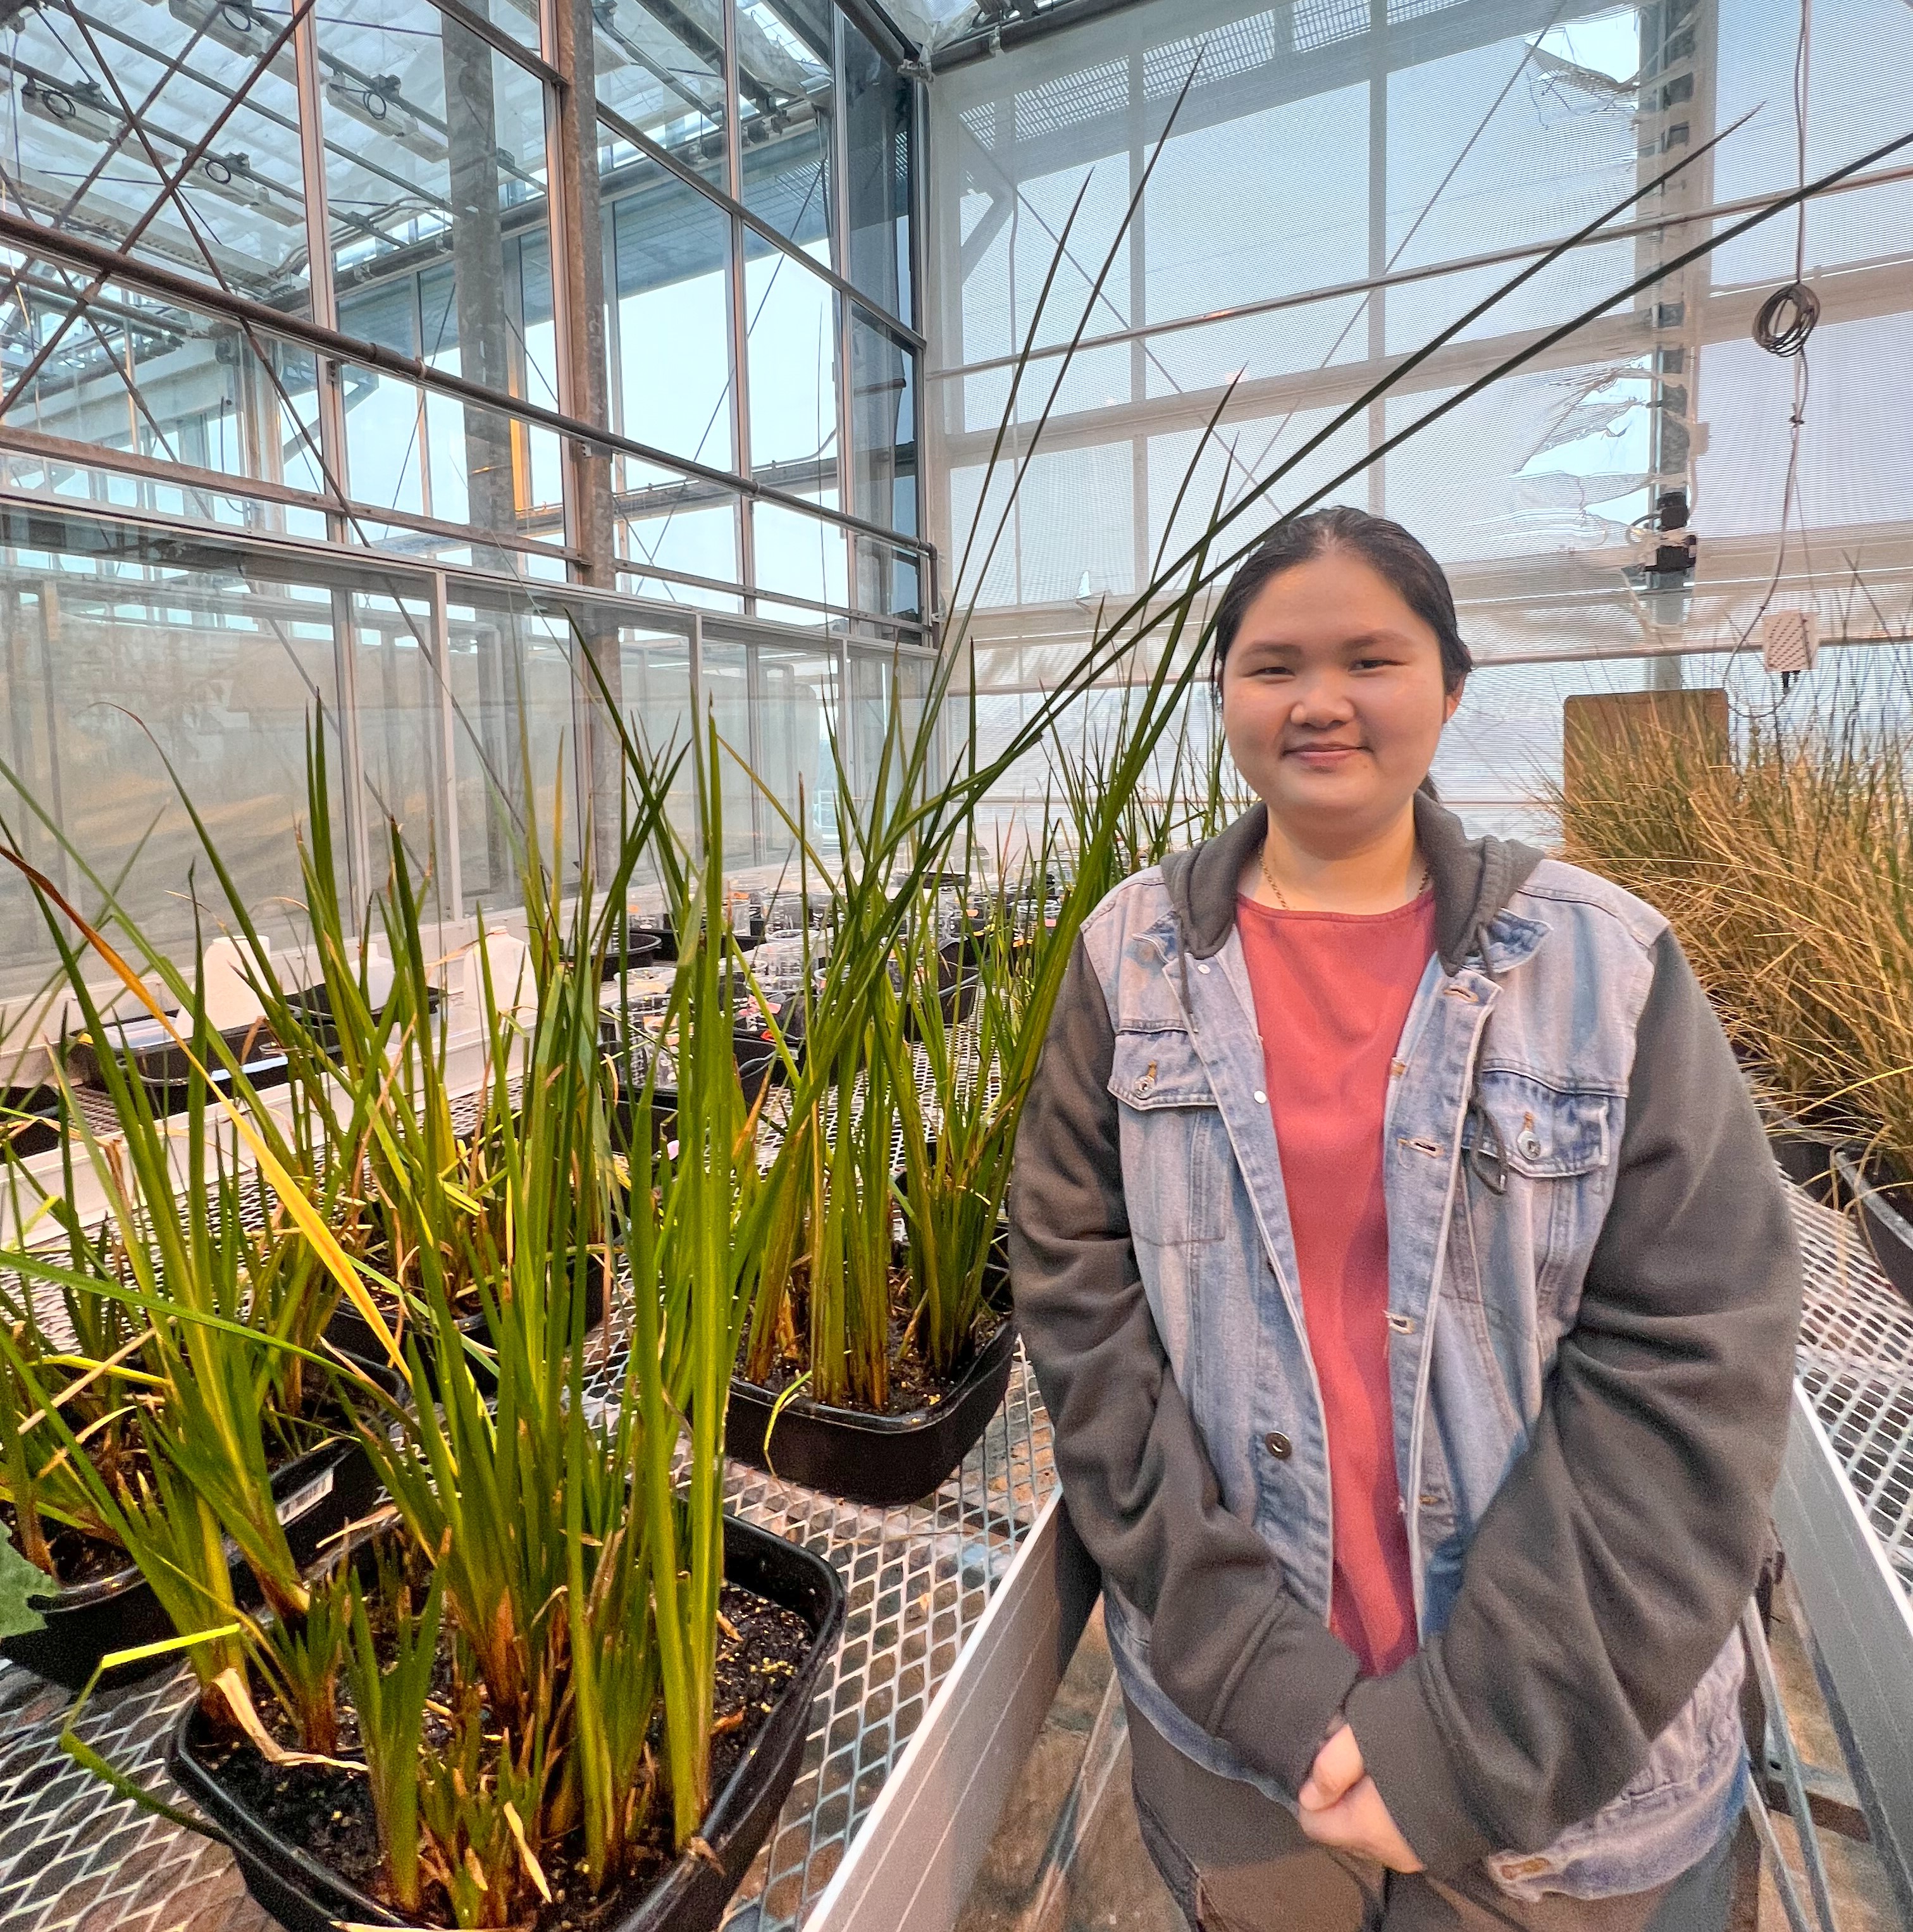 Woman standing in a greenhouse filled with plants on tables. The plants are long green stalks. 